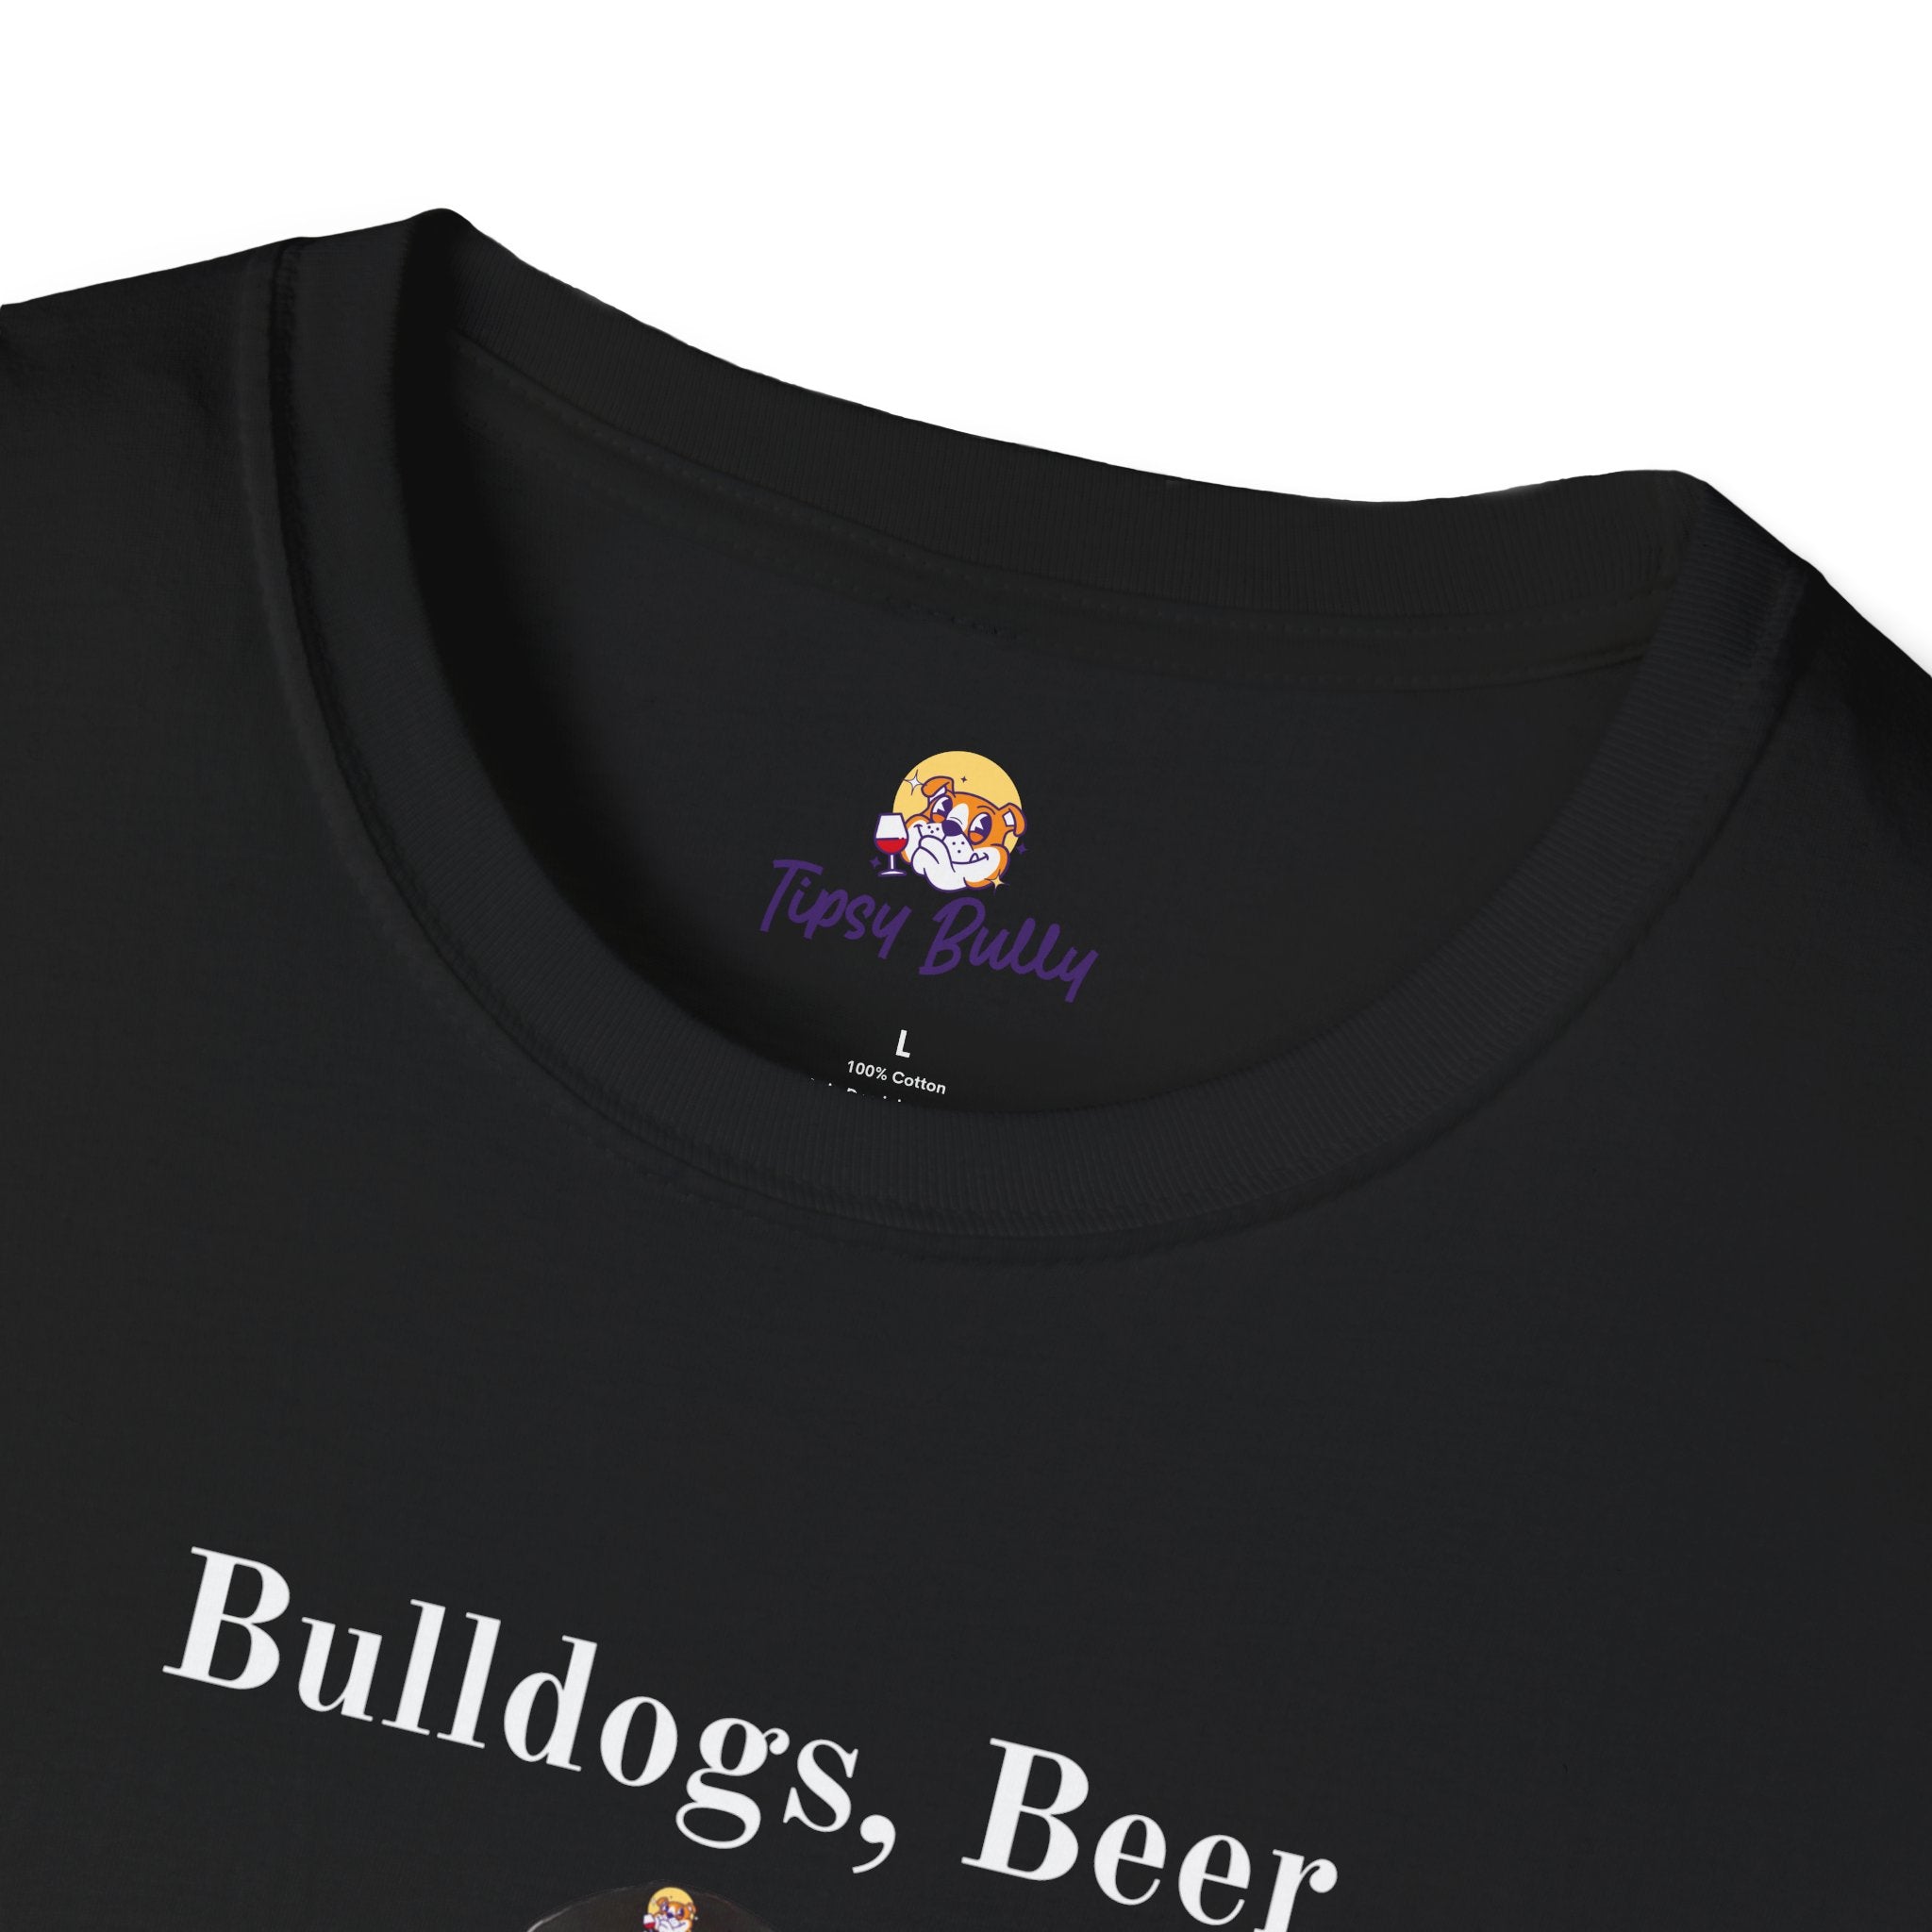 Bulldogs, Beer, and Bad Decisions" Unisex T-Shirt by Tipsy Bully (English/Black)